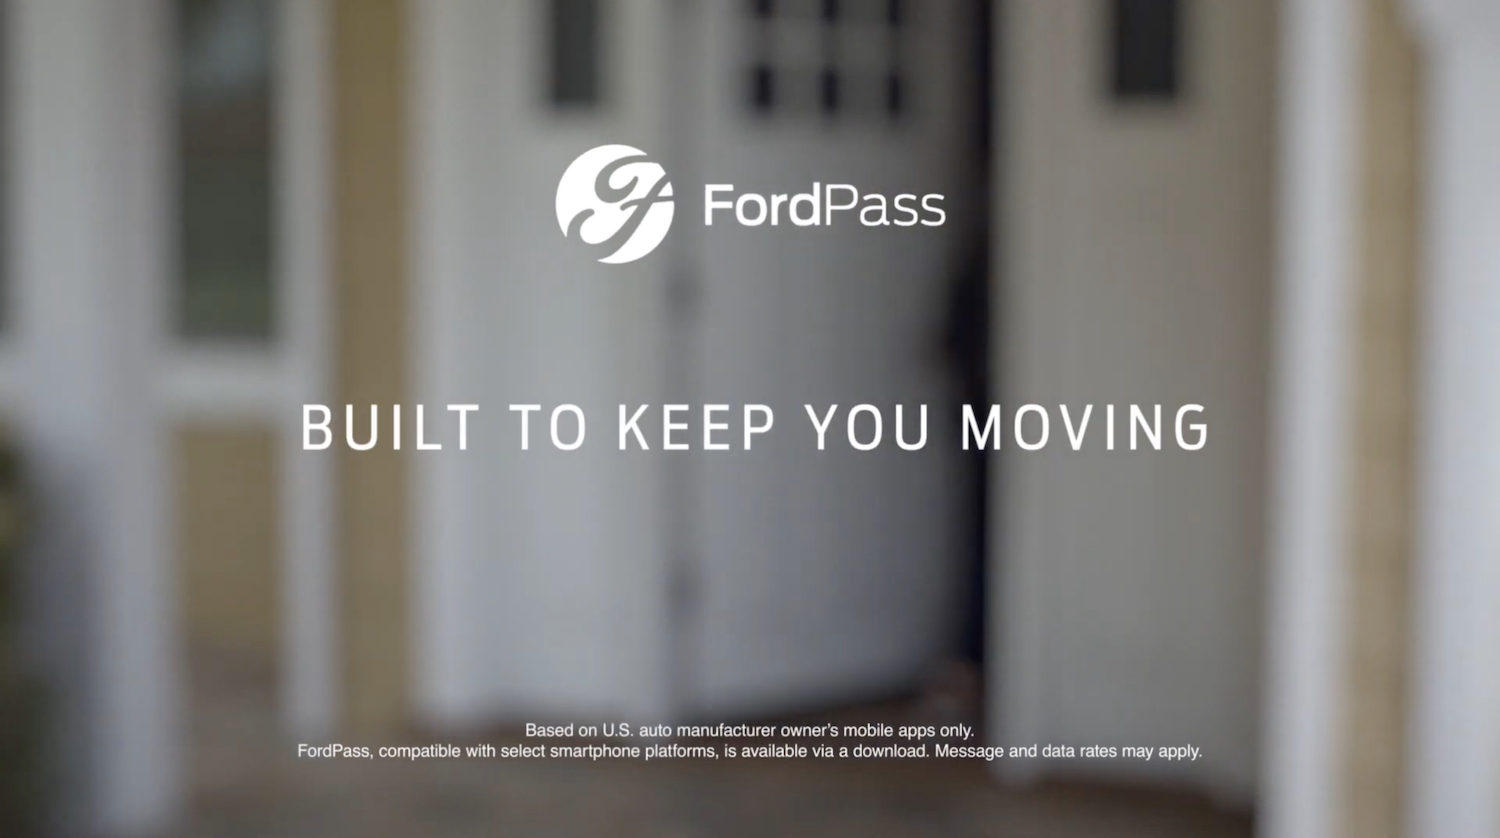 Fordpass Services Are Now Free